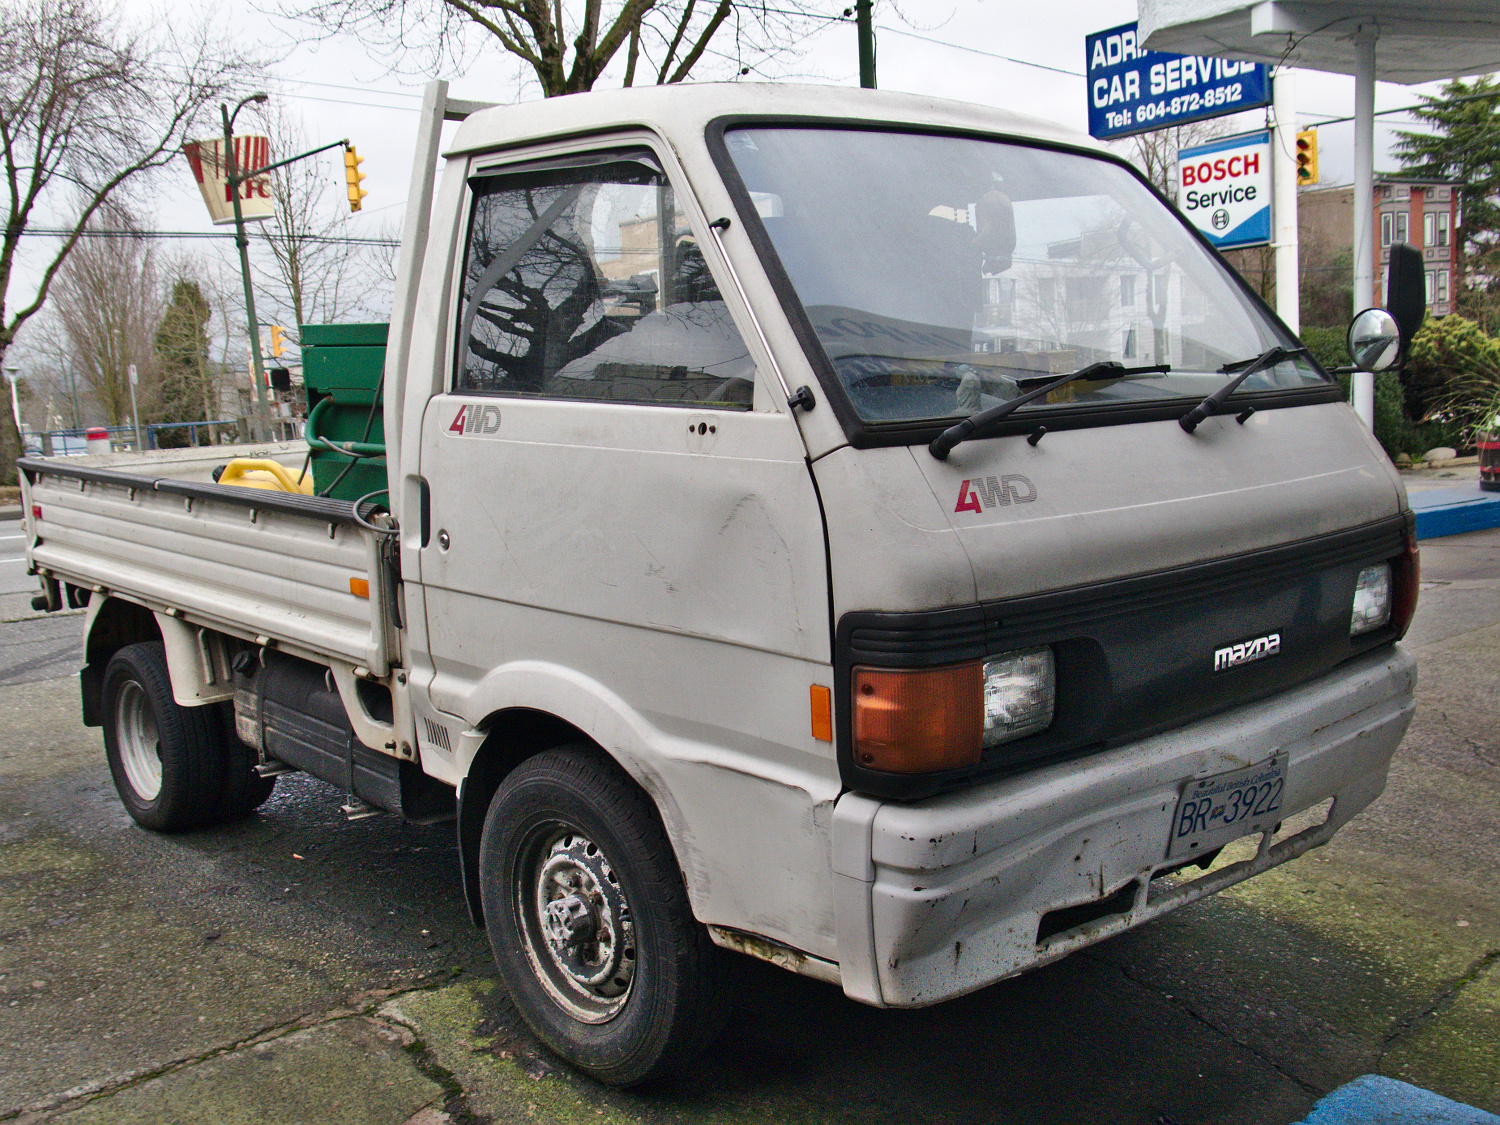 Old Parked Cars Vancouver: 1990 Mazda Bongo truck